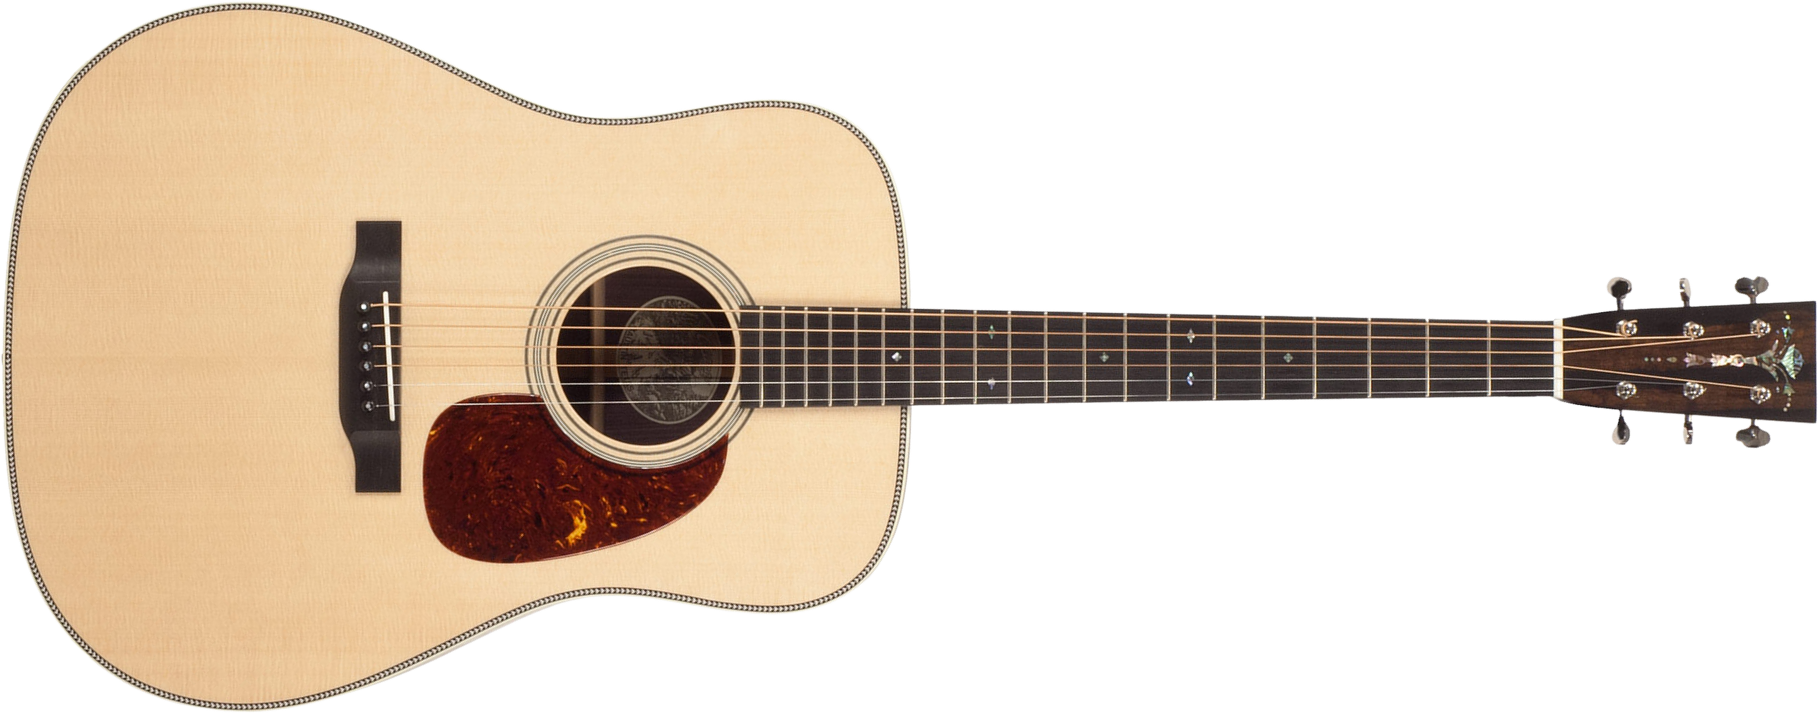 Collings D2h Custom Satin Neck, Torch Head #27113 - Natural - Westerngitarre & electro - Main picture